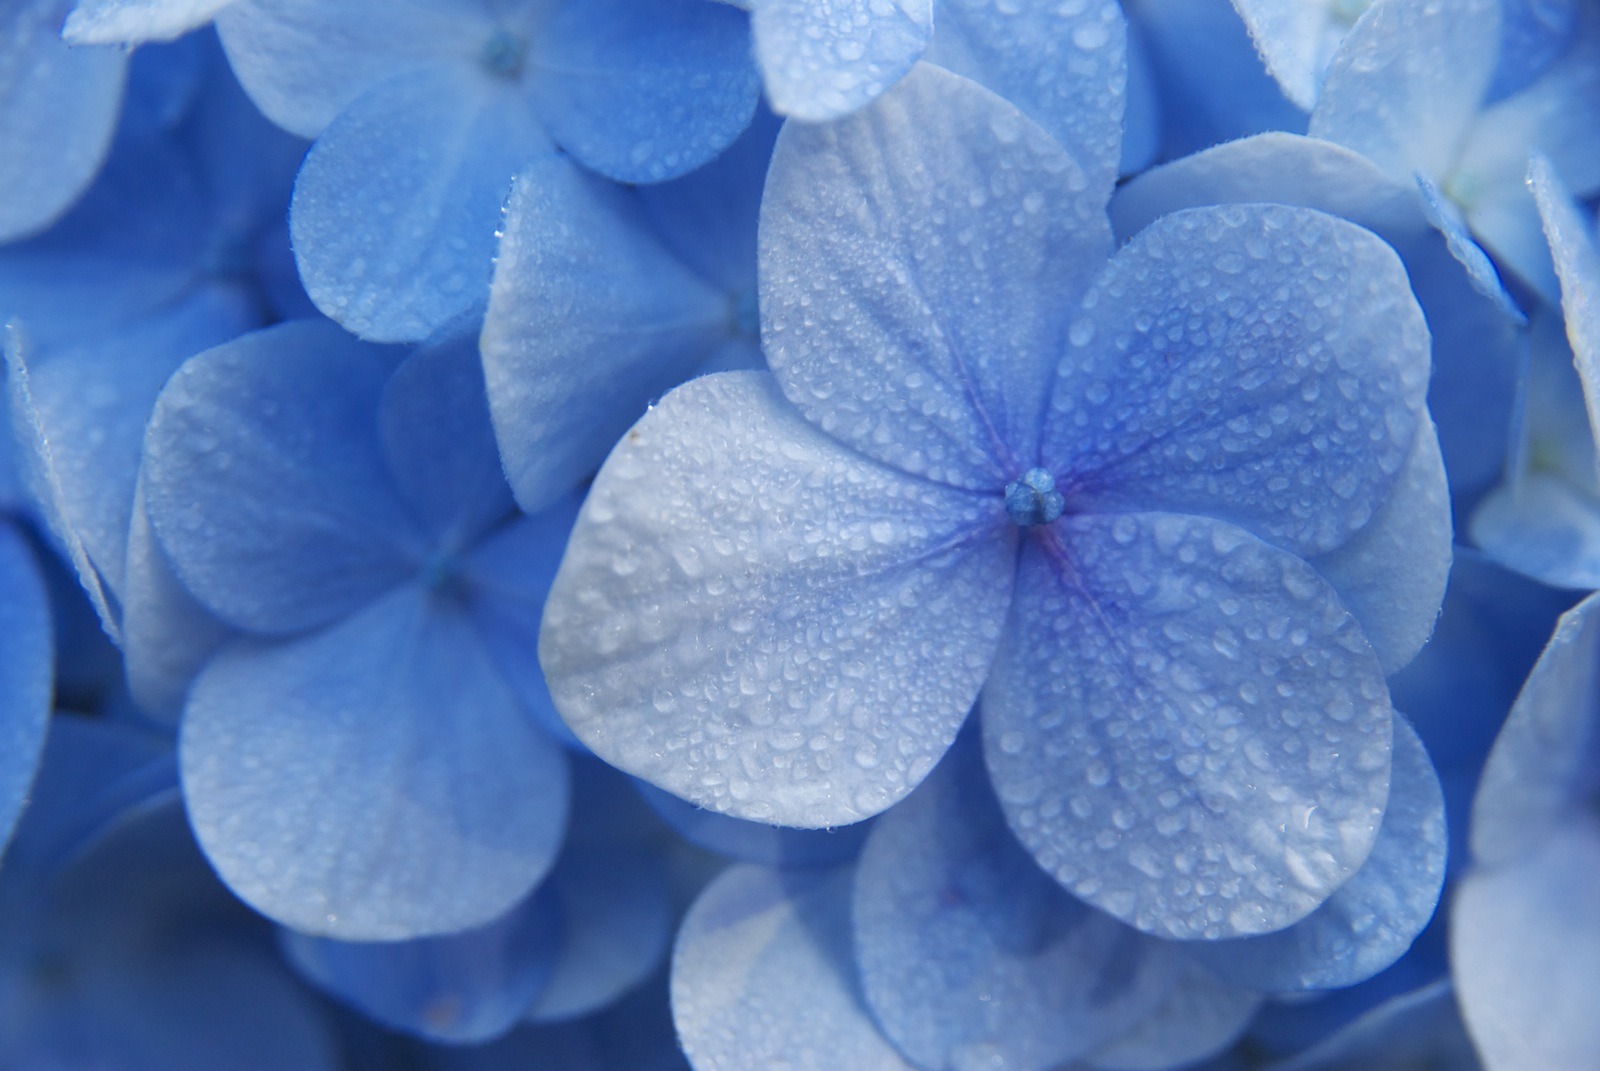 Hydrangea, Blue Flowers with dew drops free image